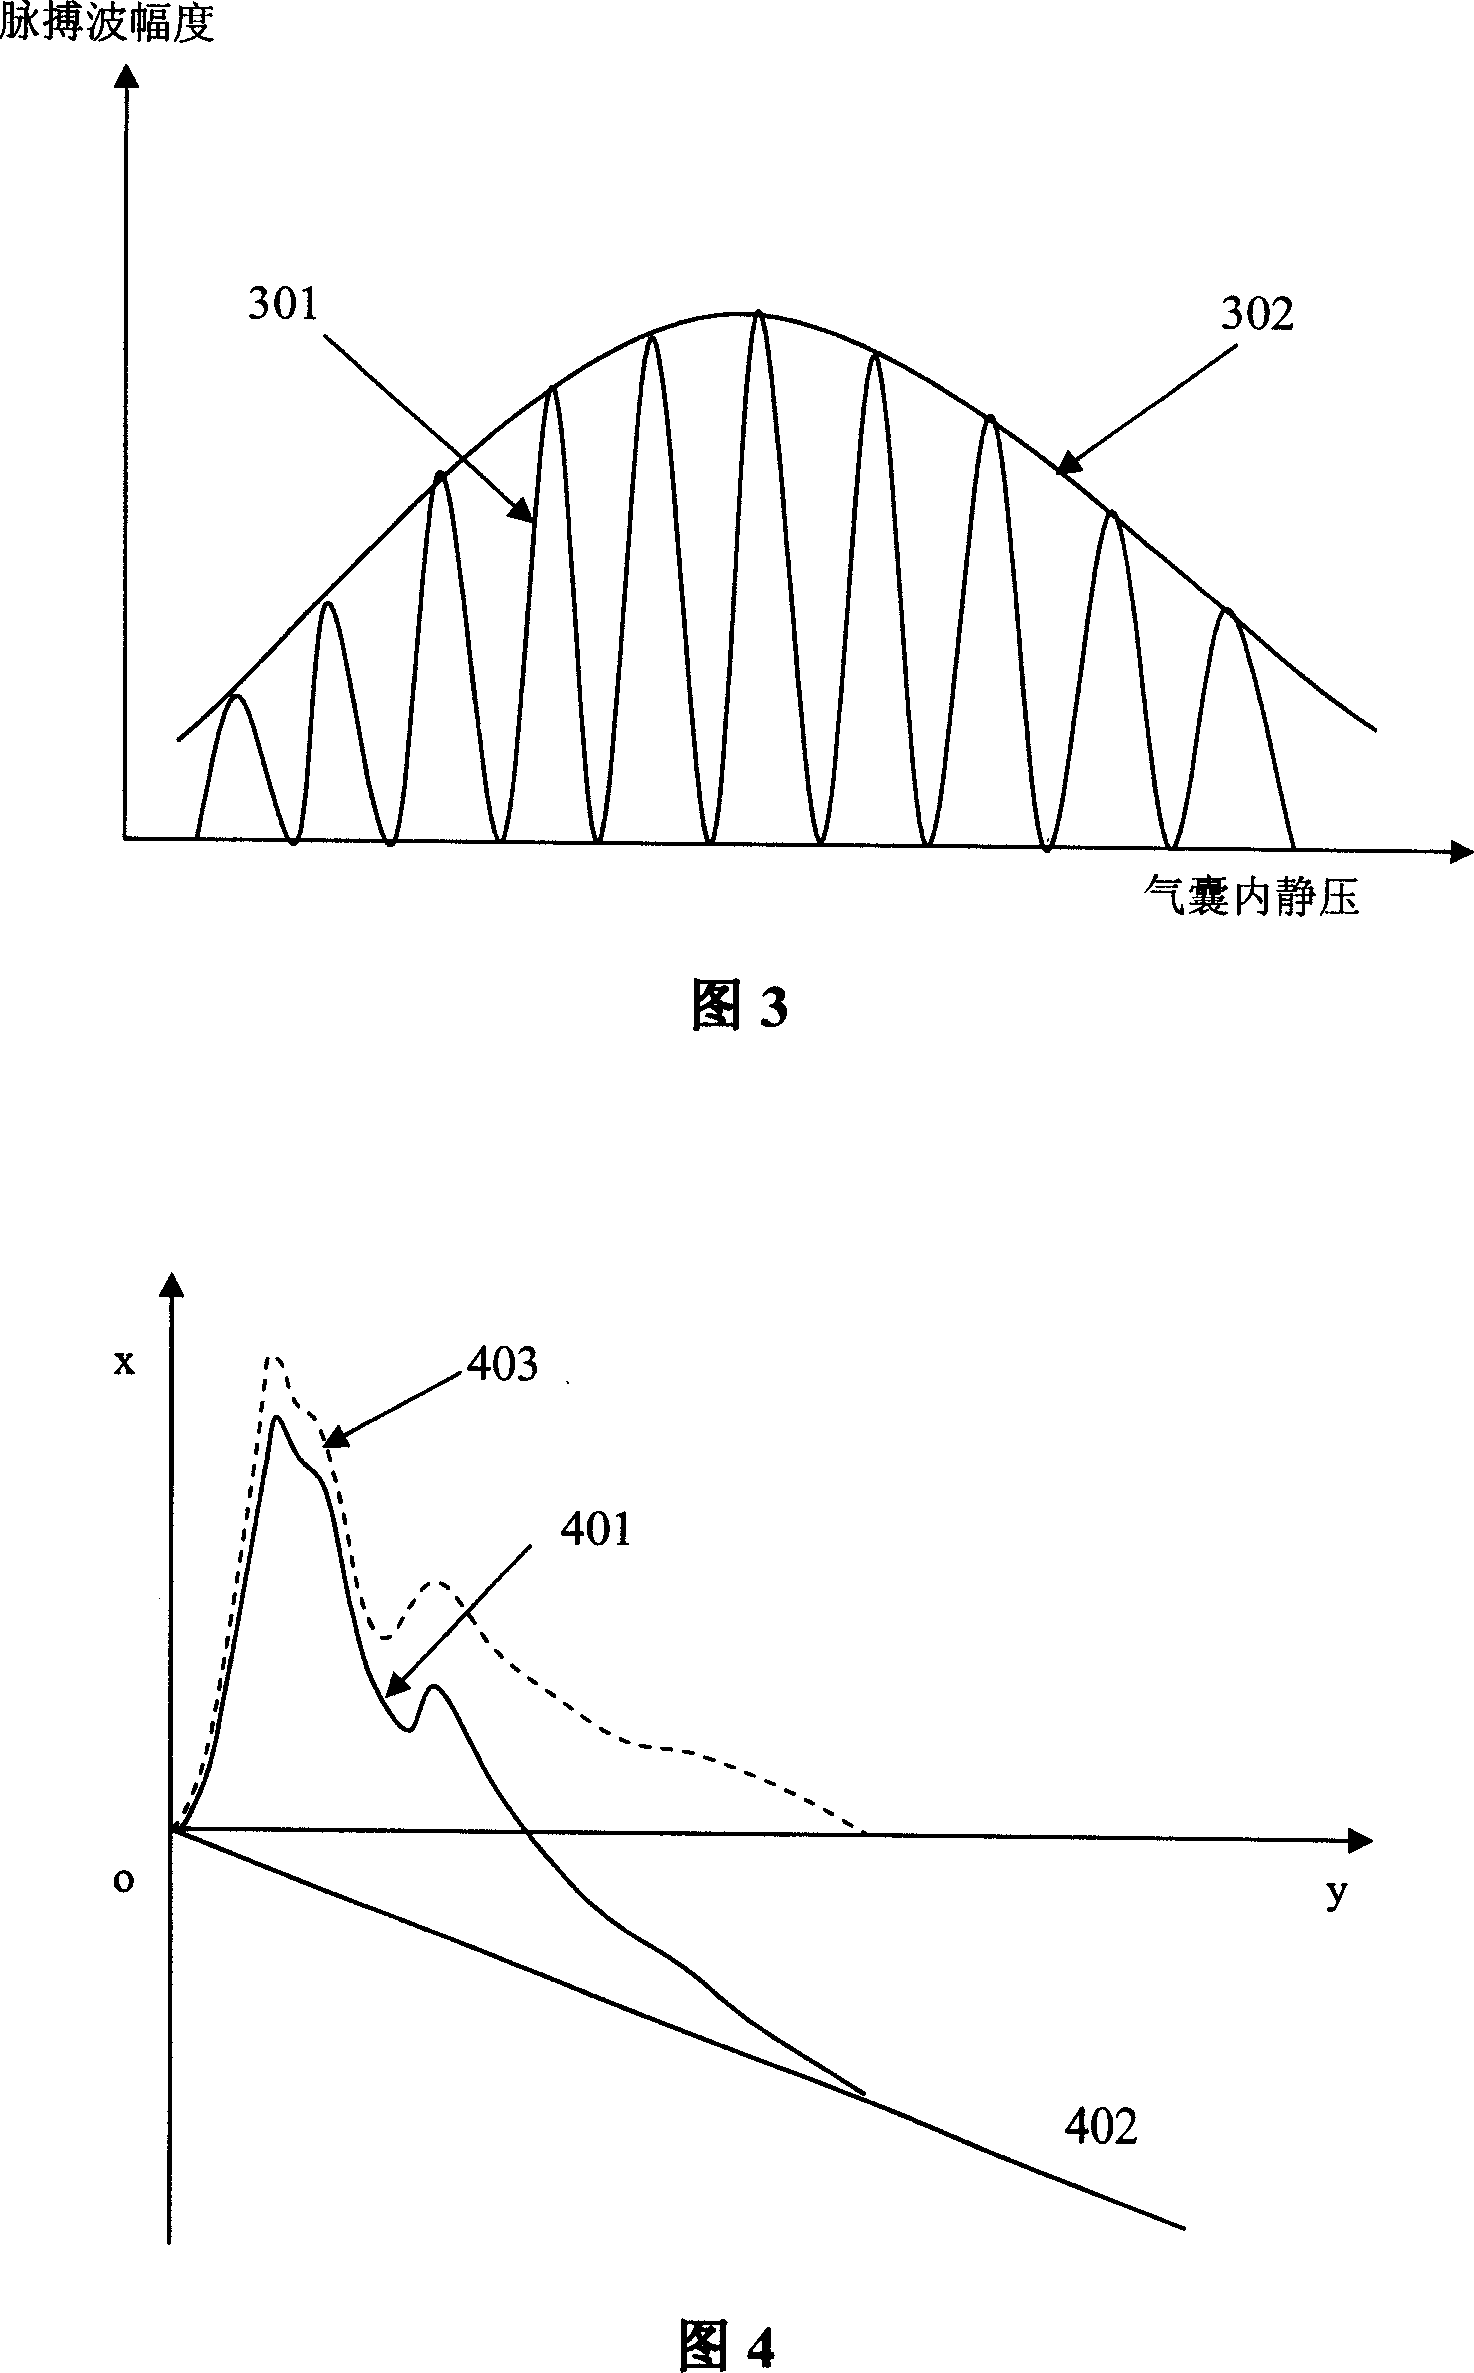 A device capable of measuring blood viscosity, vascular elasticity and blood pressure and measurement method thereof